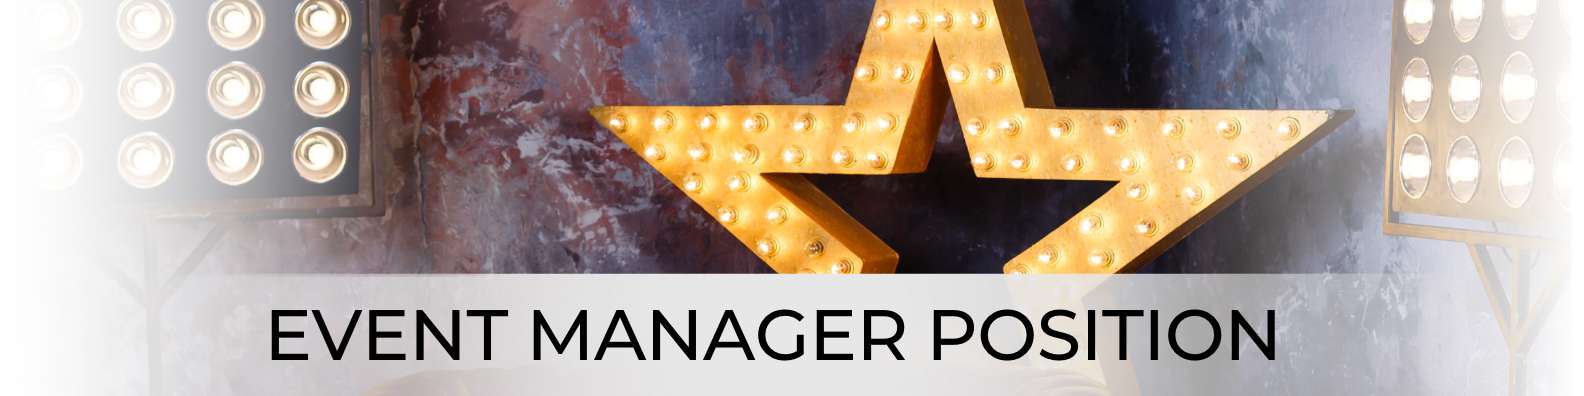 event manager position for entertainment company